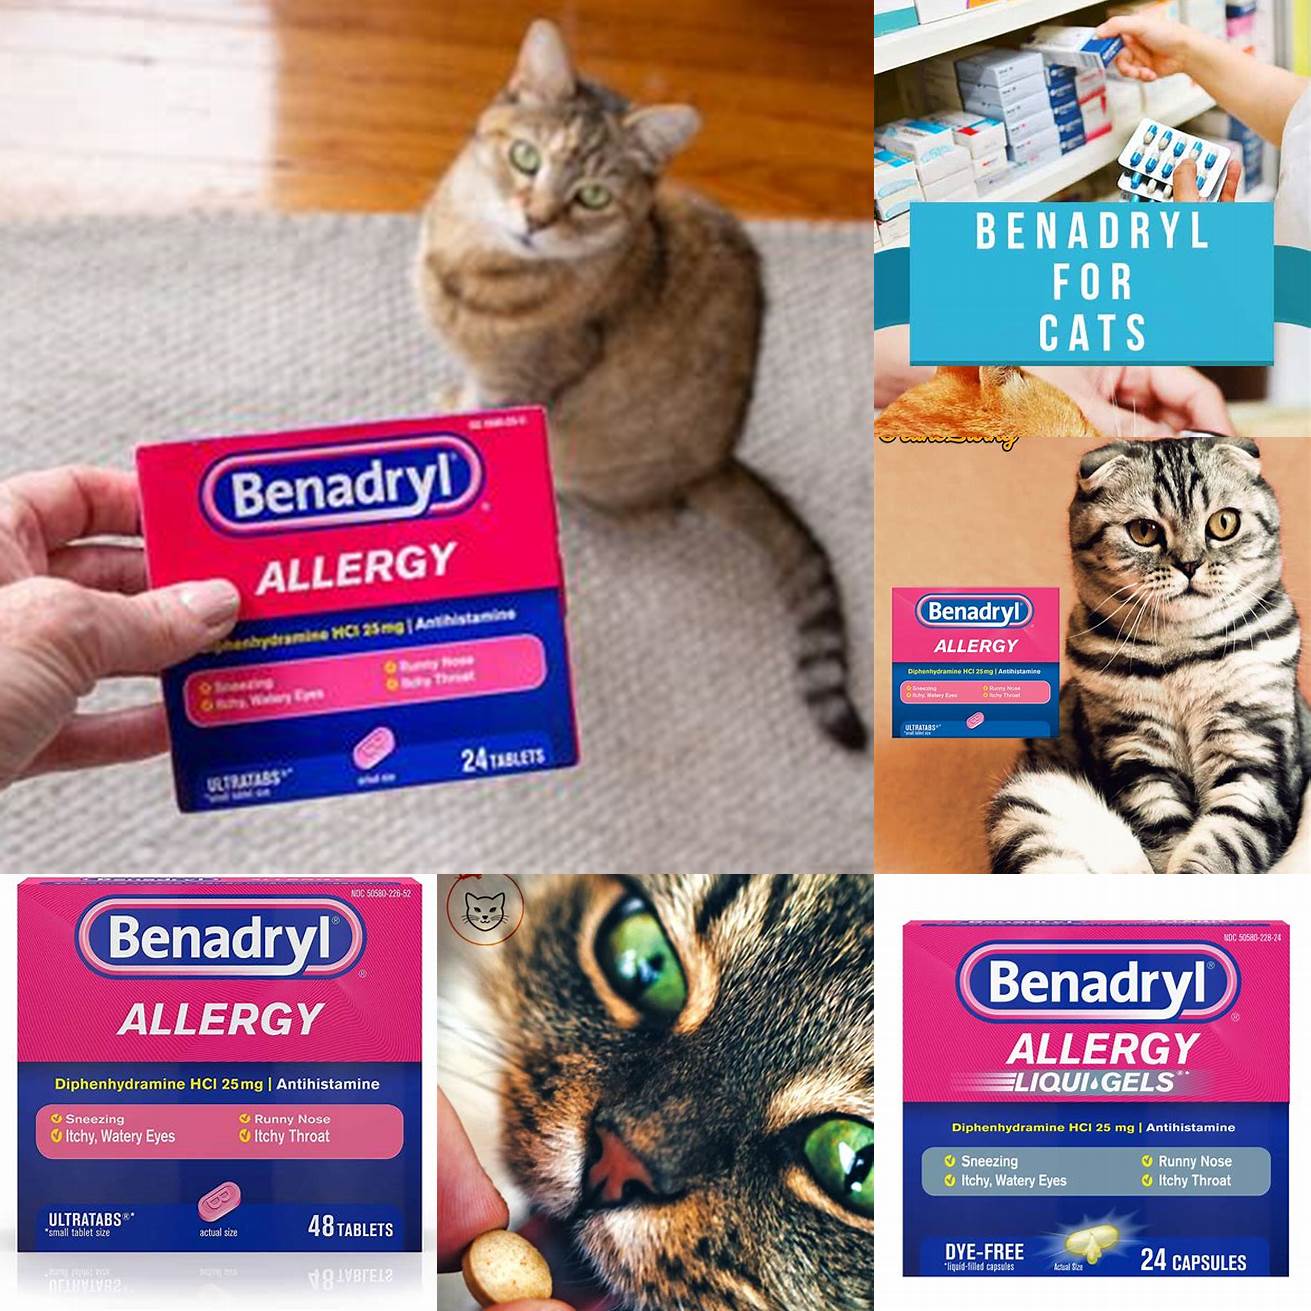 Q How long does Benadryl take to work in cats